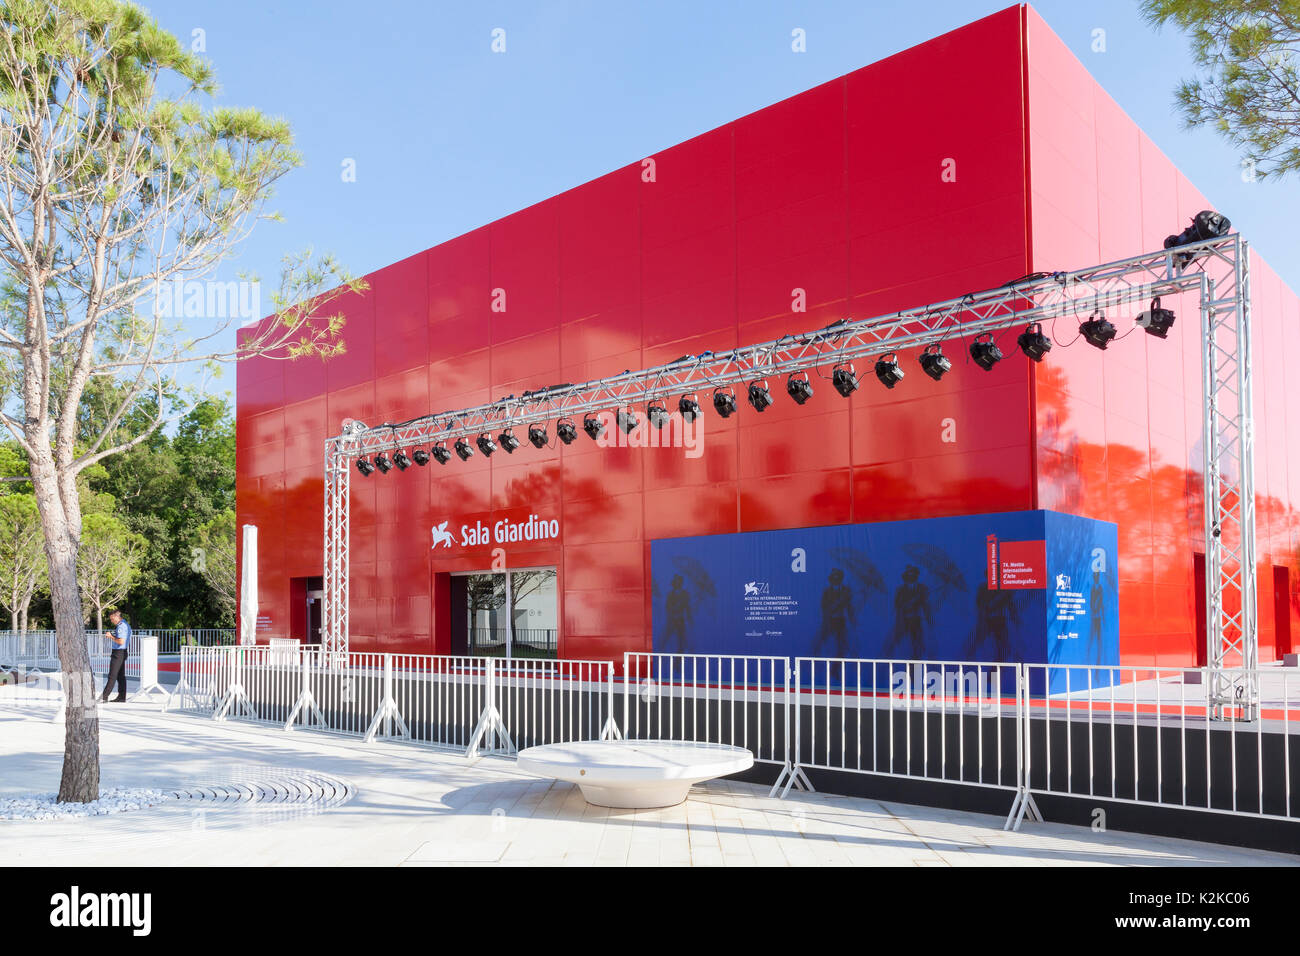 Lido, Venice, Italy. 30th Aug, 2017. Venues for the 2017 Film Festival after last minute preparations and installations and before the crowds arrive for the opening of the festival. The row of spot lights above the red carpet entrance to the Sala Giardino and barrier separating it from the center courtyard between venues with seating. Stock Photo